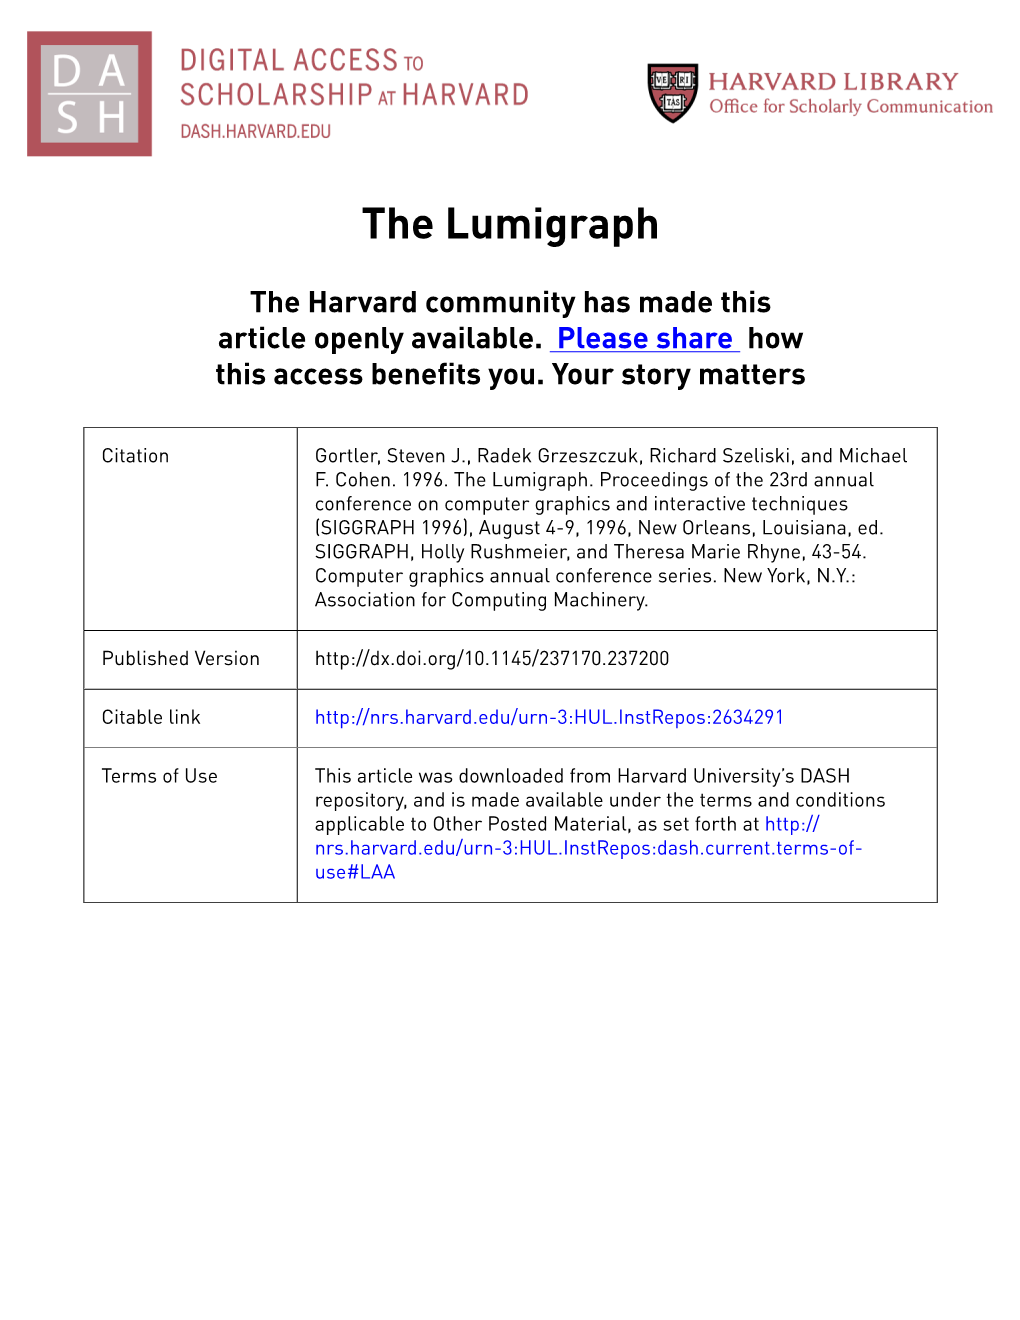 The Lumigraph